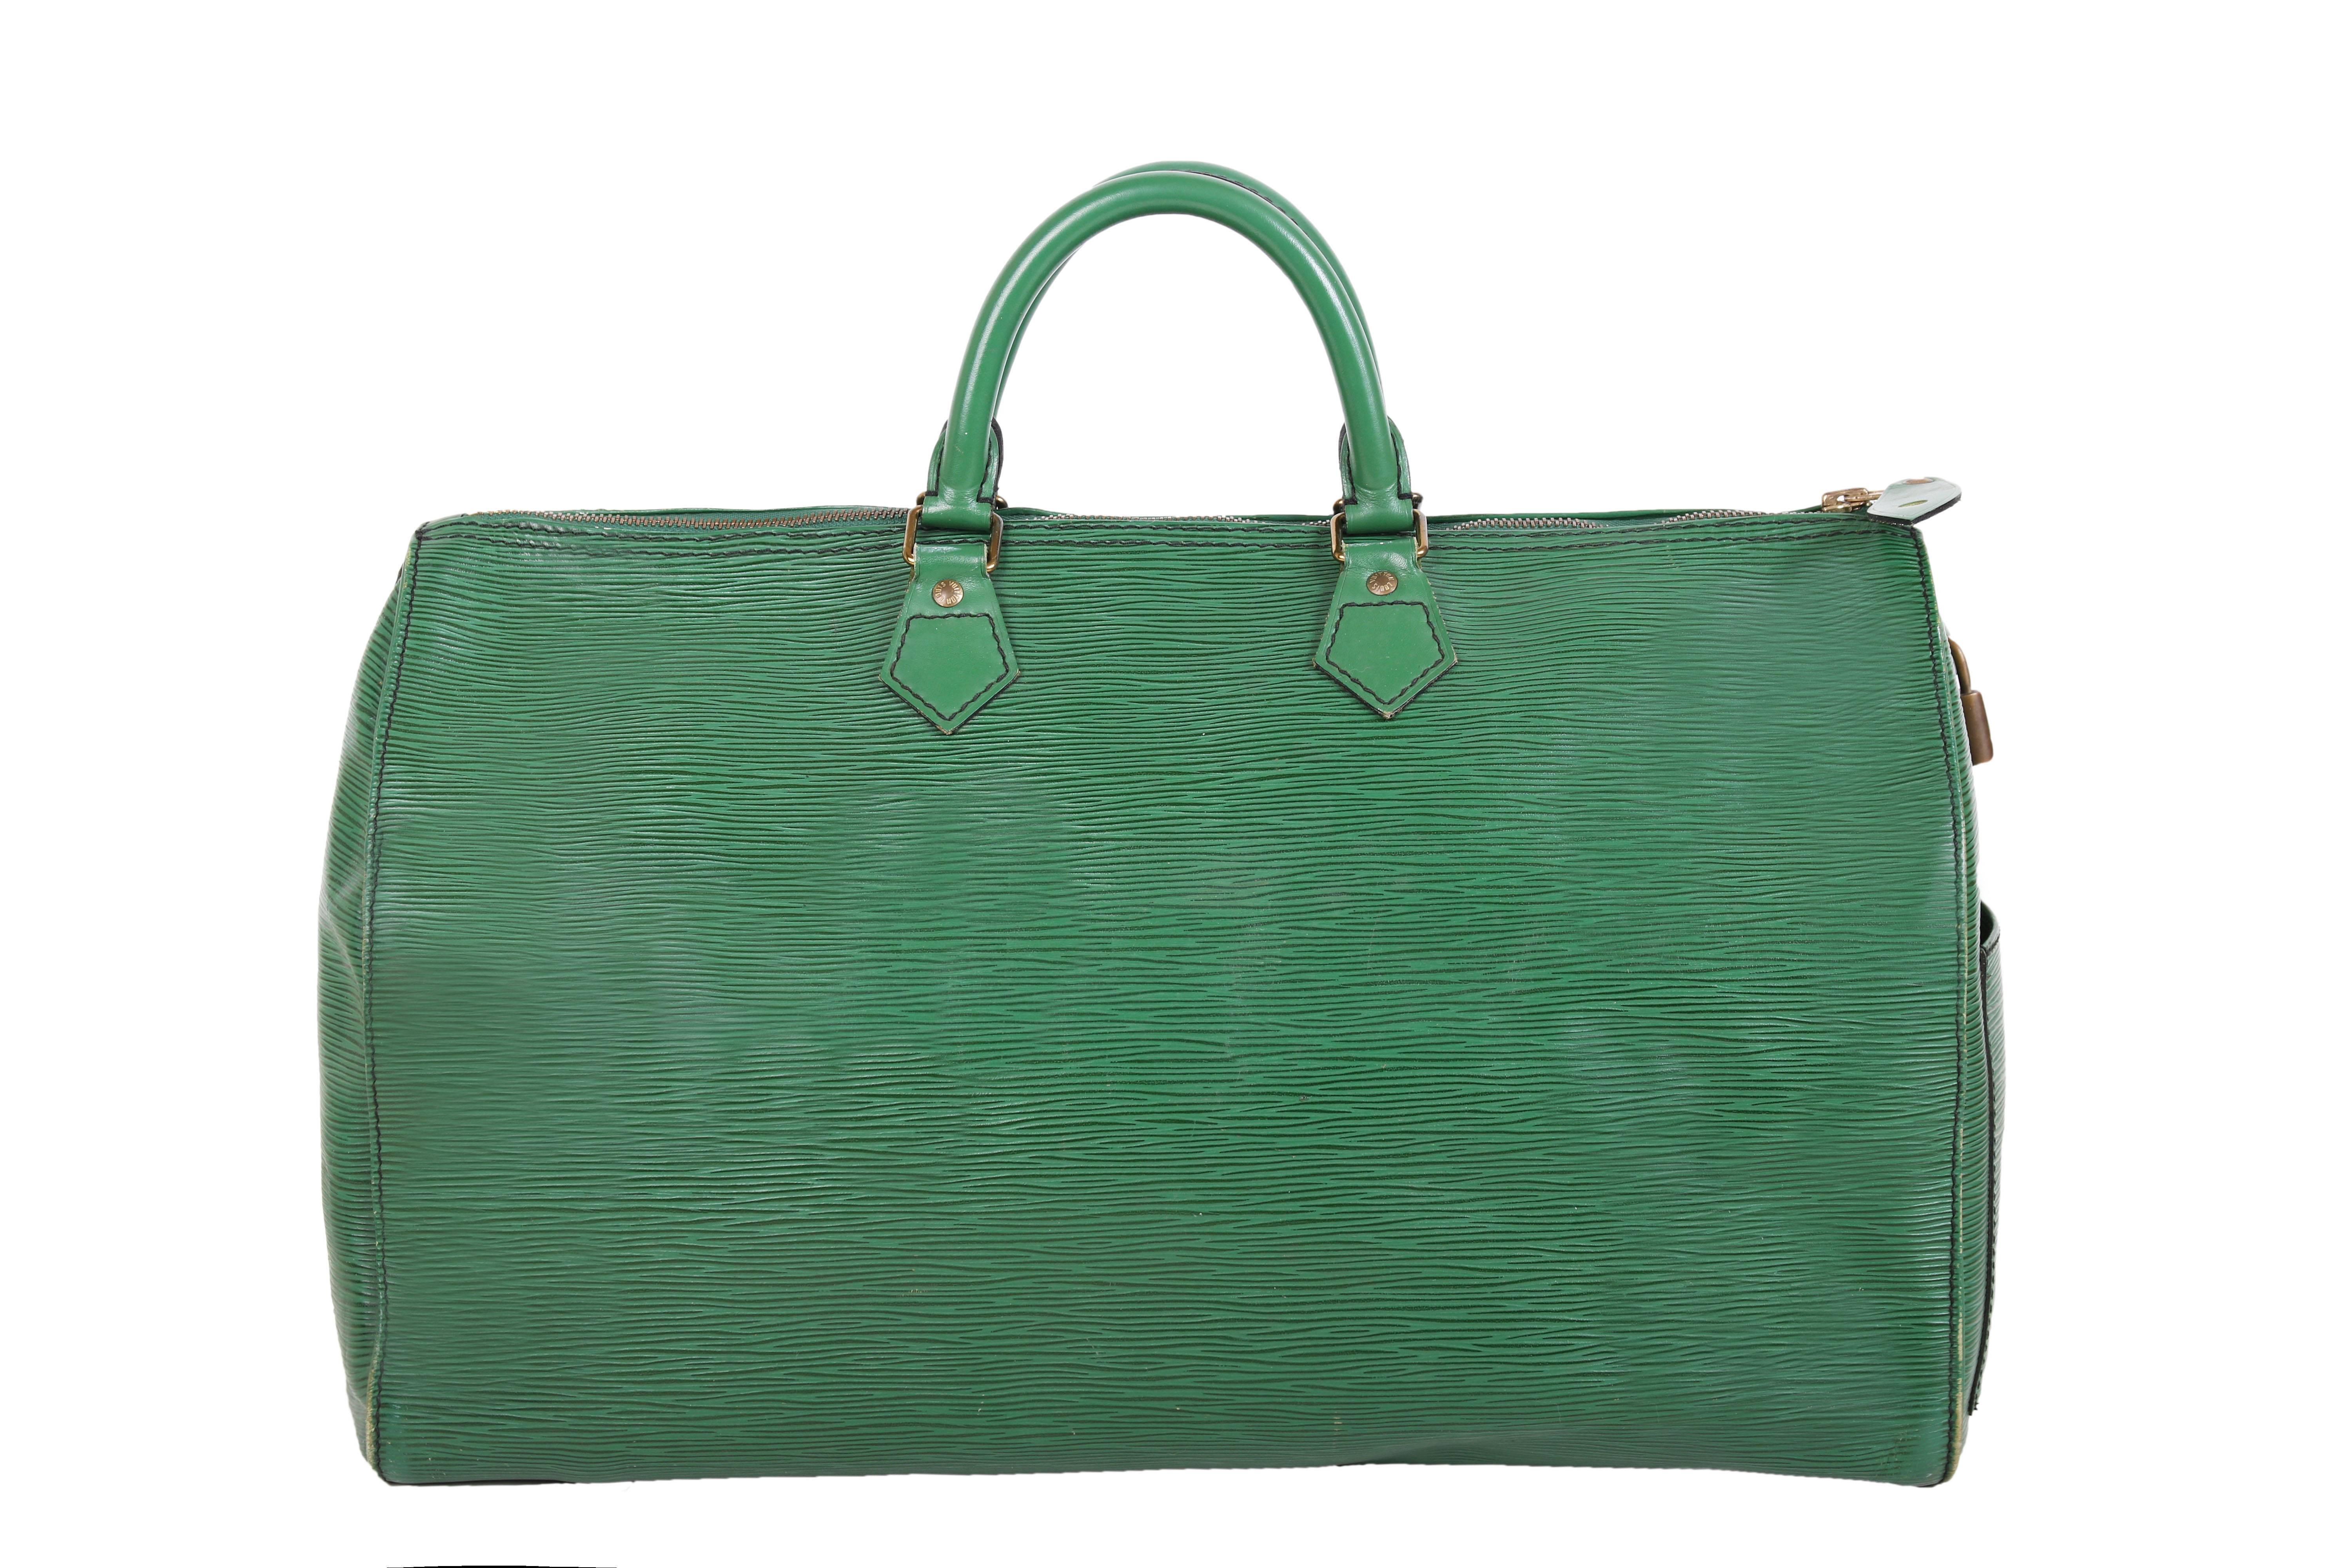  1990 Louis Vuitton green epi leather speedy bag with two top handles. The bag features one interior pocket, one exterior side pocket, and LV logo lock. LV logo is stamped onto buttons at each handle, zipper, and exterior leather tab near zipper. In